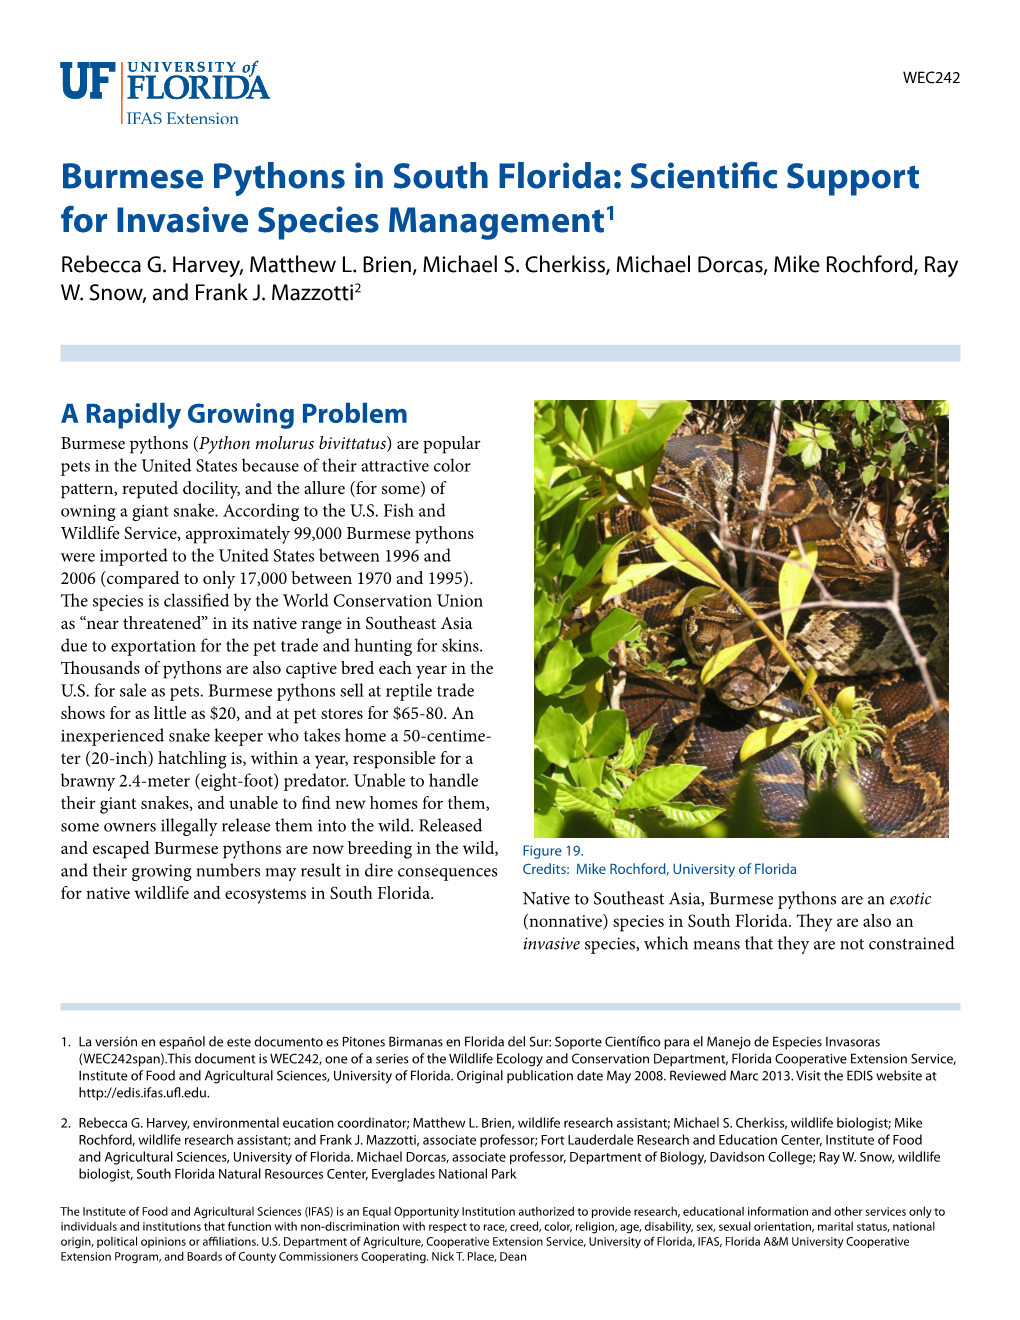 Burmese Pythons in South Florida: Scientific Support for Invasive Species Management1 Rebecca G